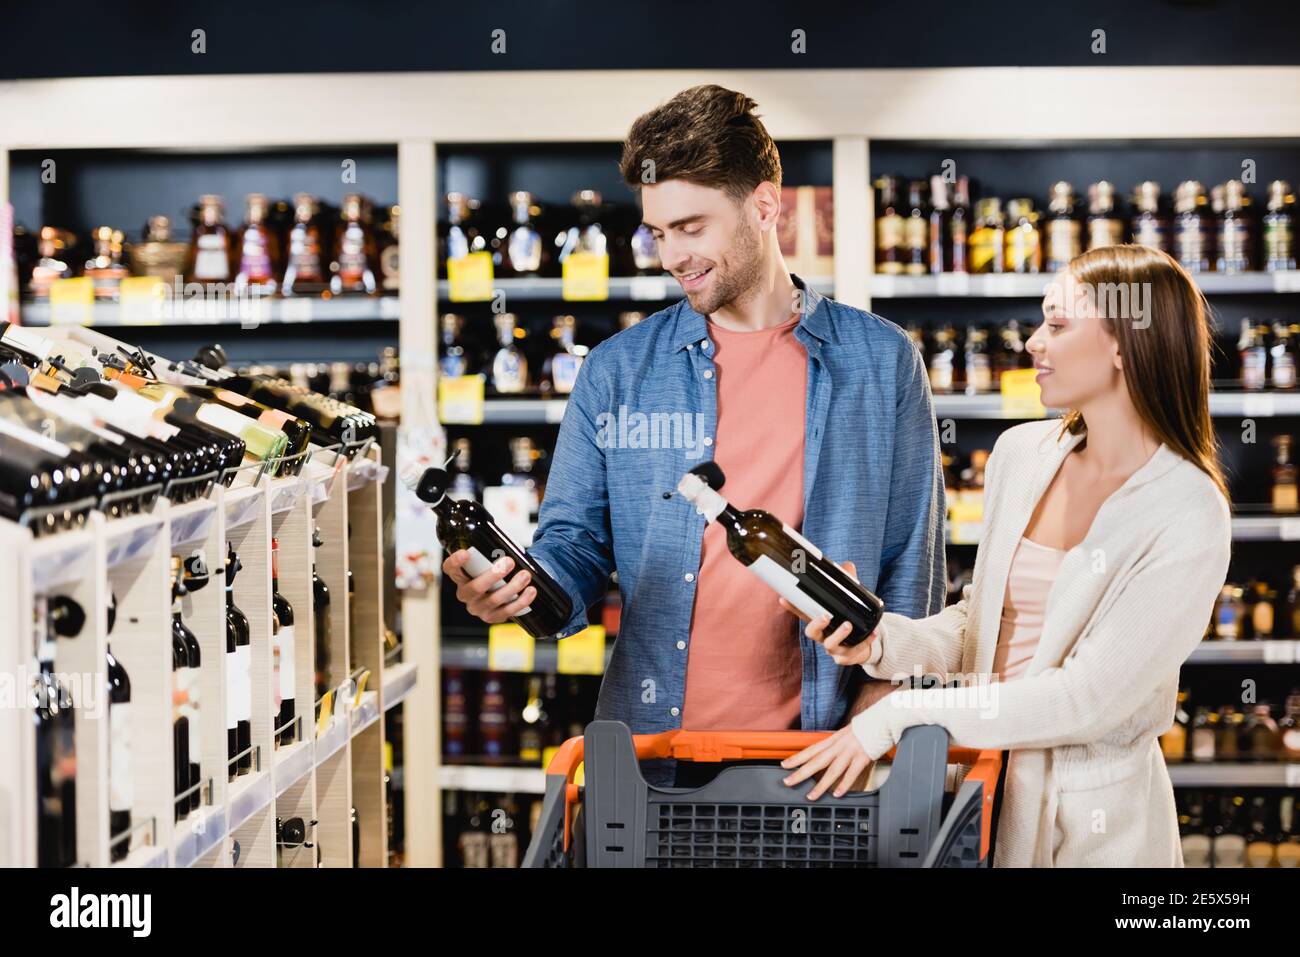 https://c8.alamy.com/comp/2E5X59H/young-couple-smiling-while-holding-bottles-of-wine-near-shopping-trolley-in-supermarket-2E5X59H.jpg